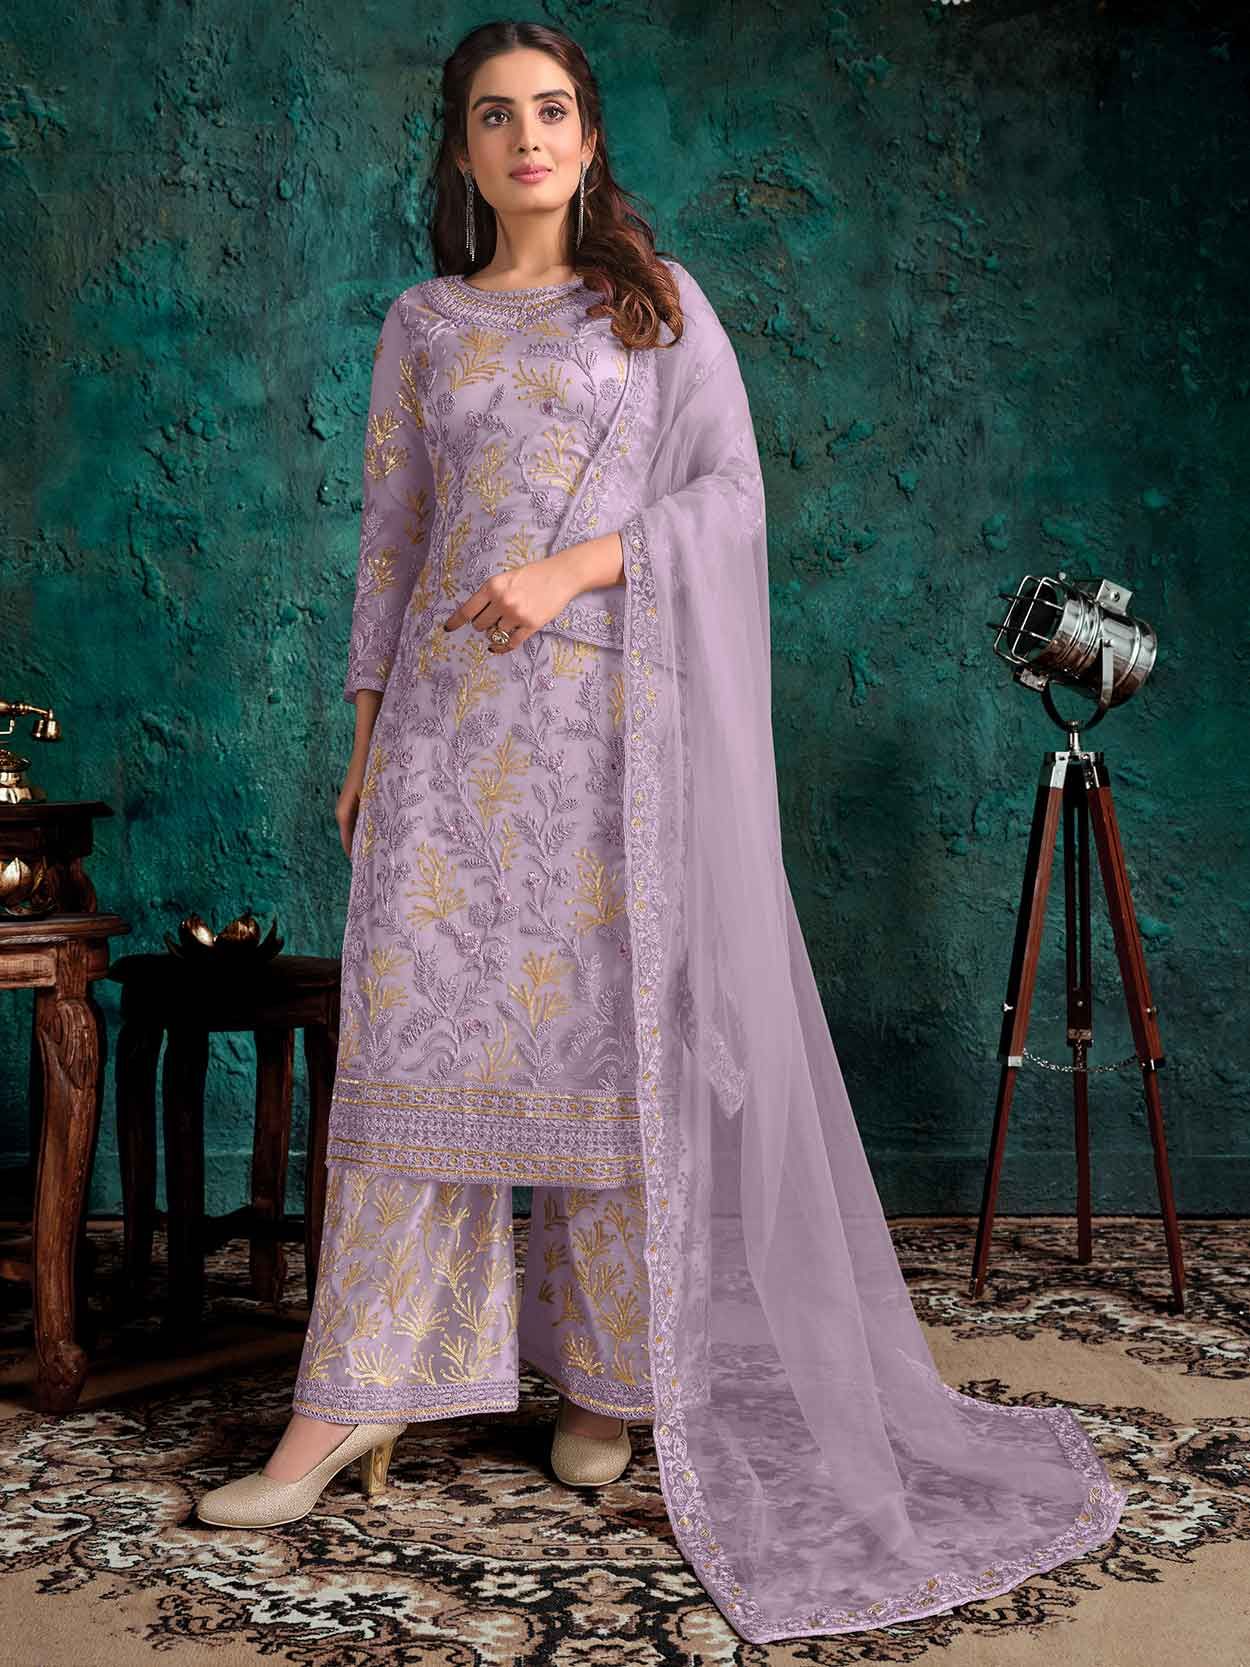 Buy Brijraj Casual Wear Purple Coloured Satin Embelished Straight Suit with  a Matching Bottom and Purple Chiffon Dupatta at Amazon.in